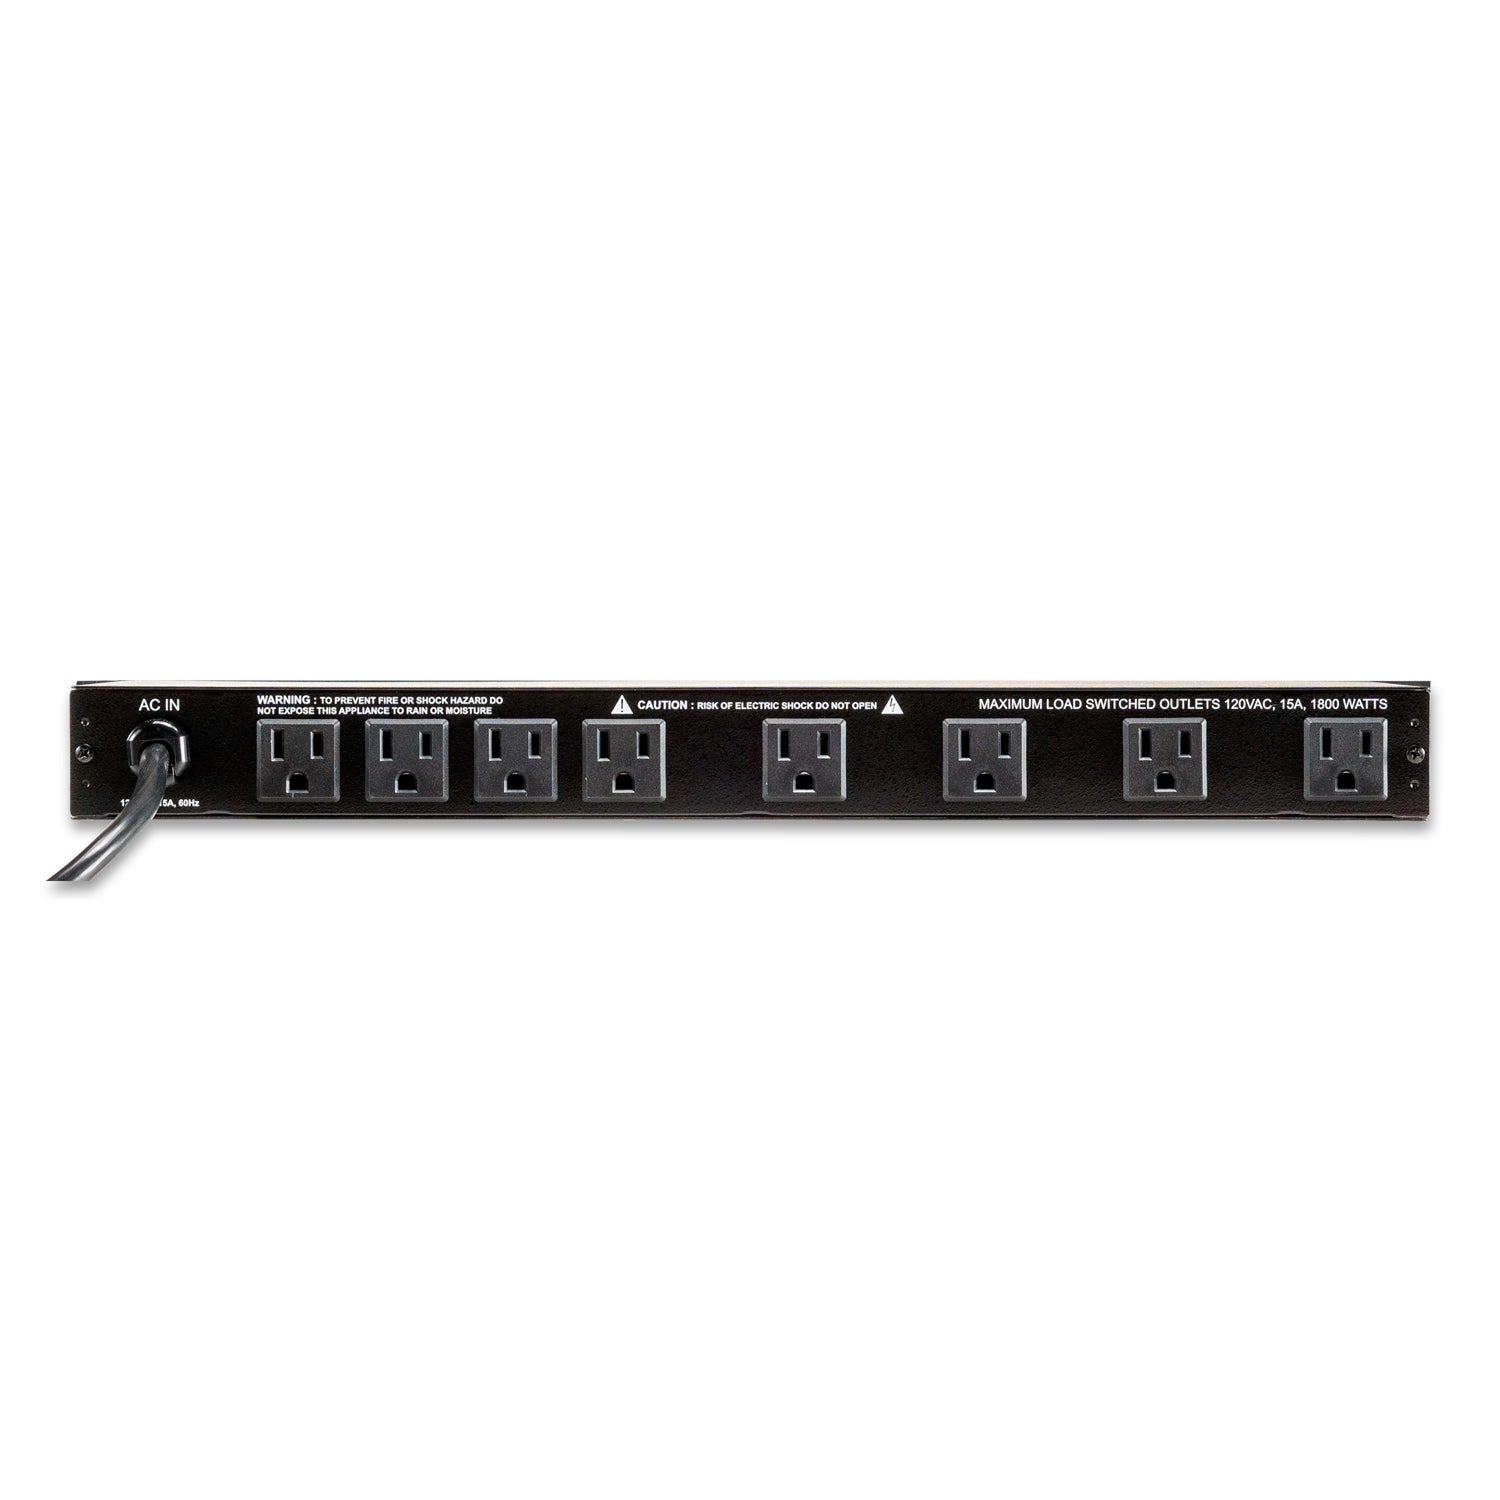 ART PS 4x4 Rackmount 8 Outlet Power Conditioner and Surge Protector - with Linear Ammeter & Voltmeter & Dual Lights